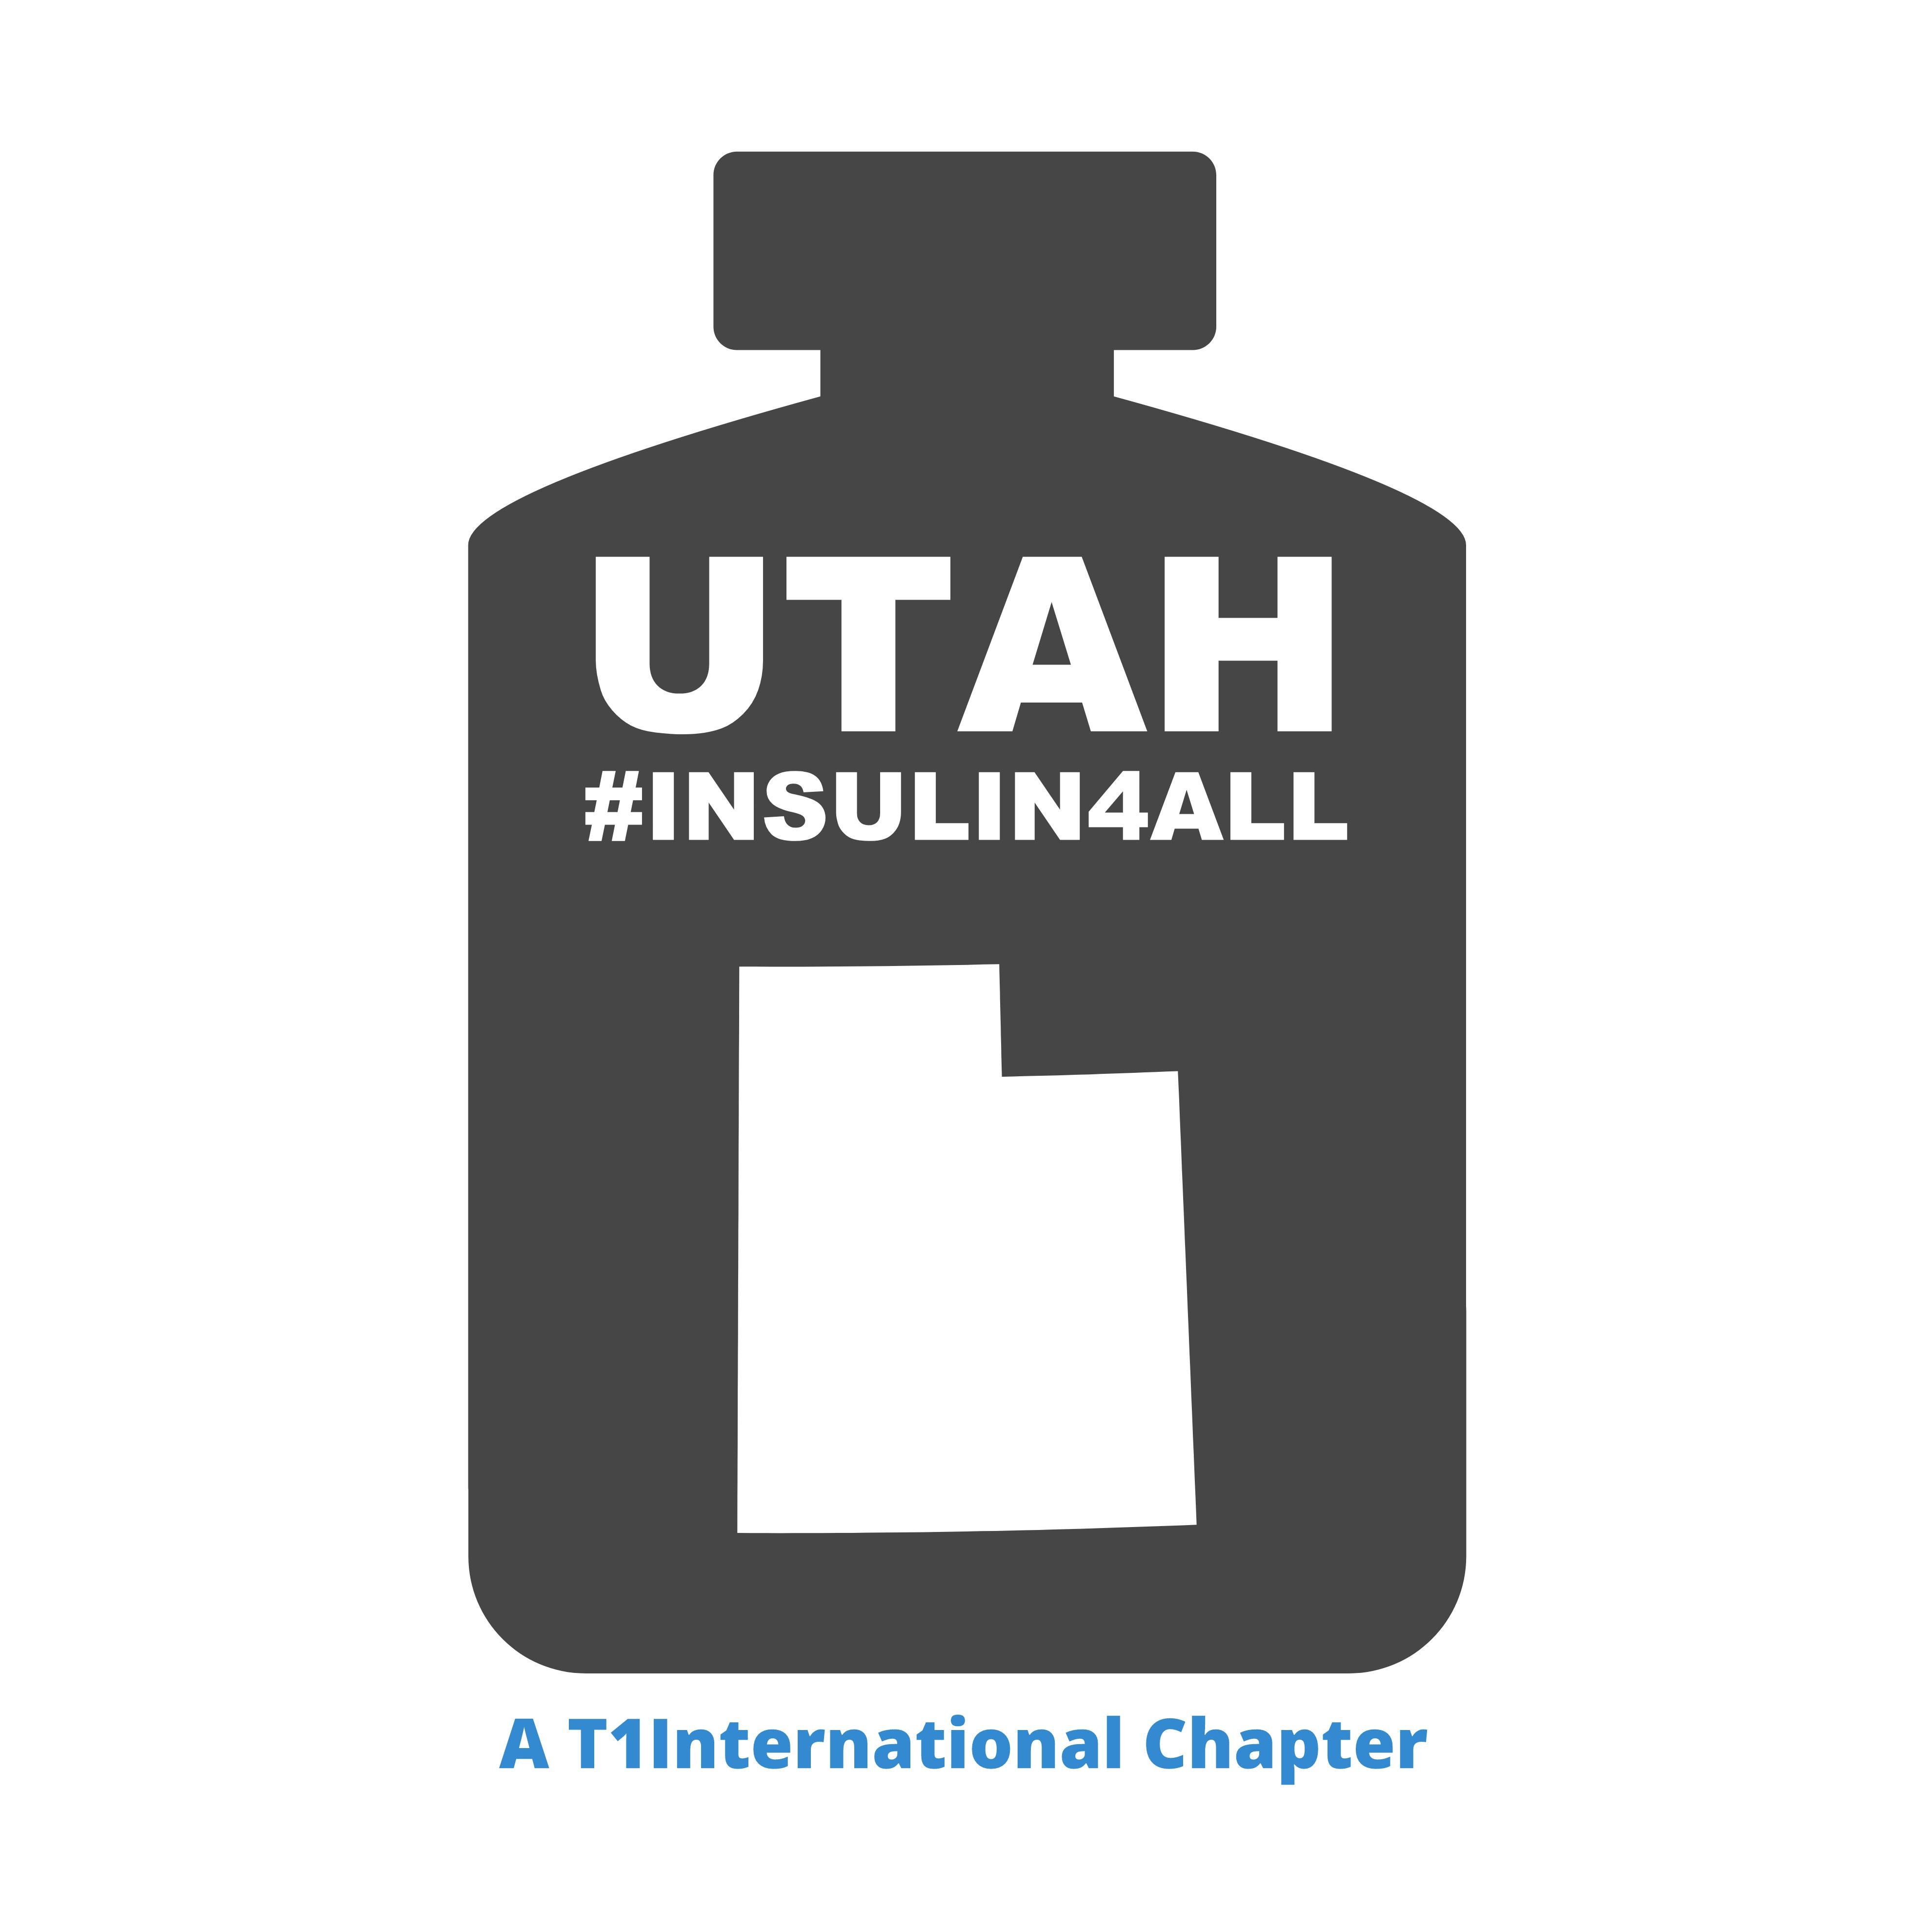 Volunteer advocates working together (with support from @t1international) for #insulin4all. We advocate for transparency and lower cost of insulin in UT.